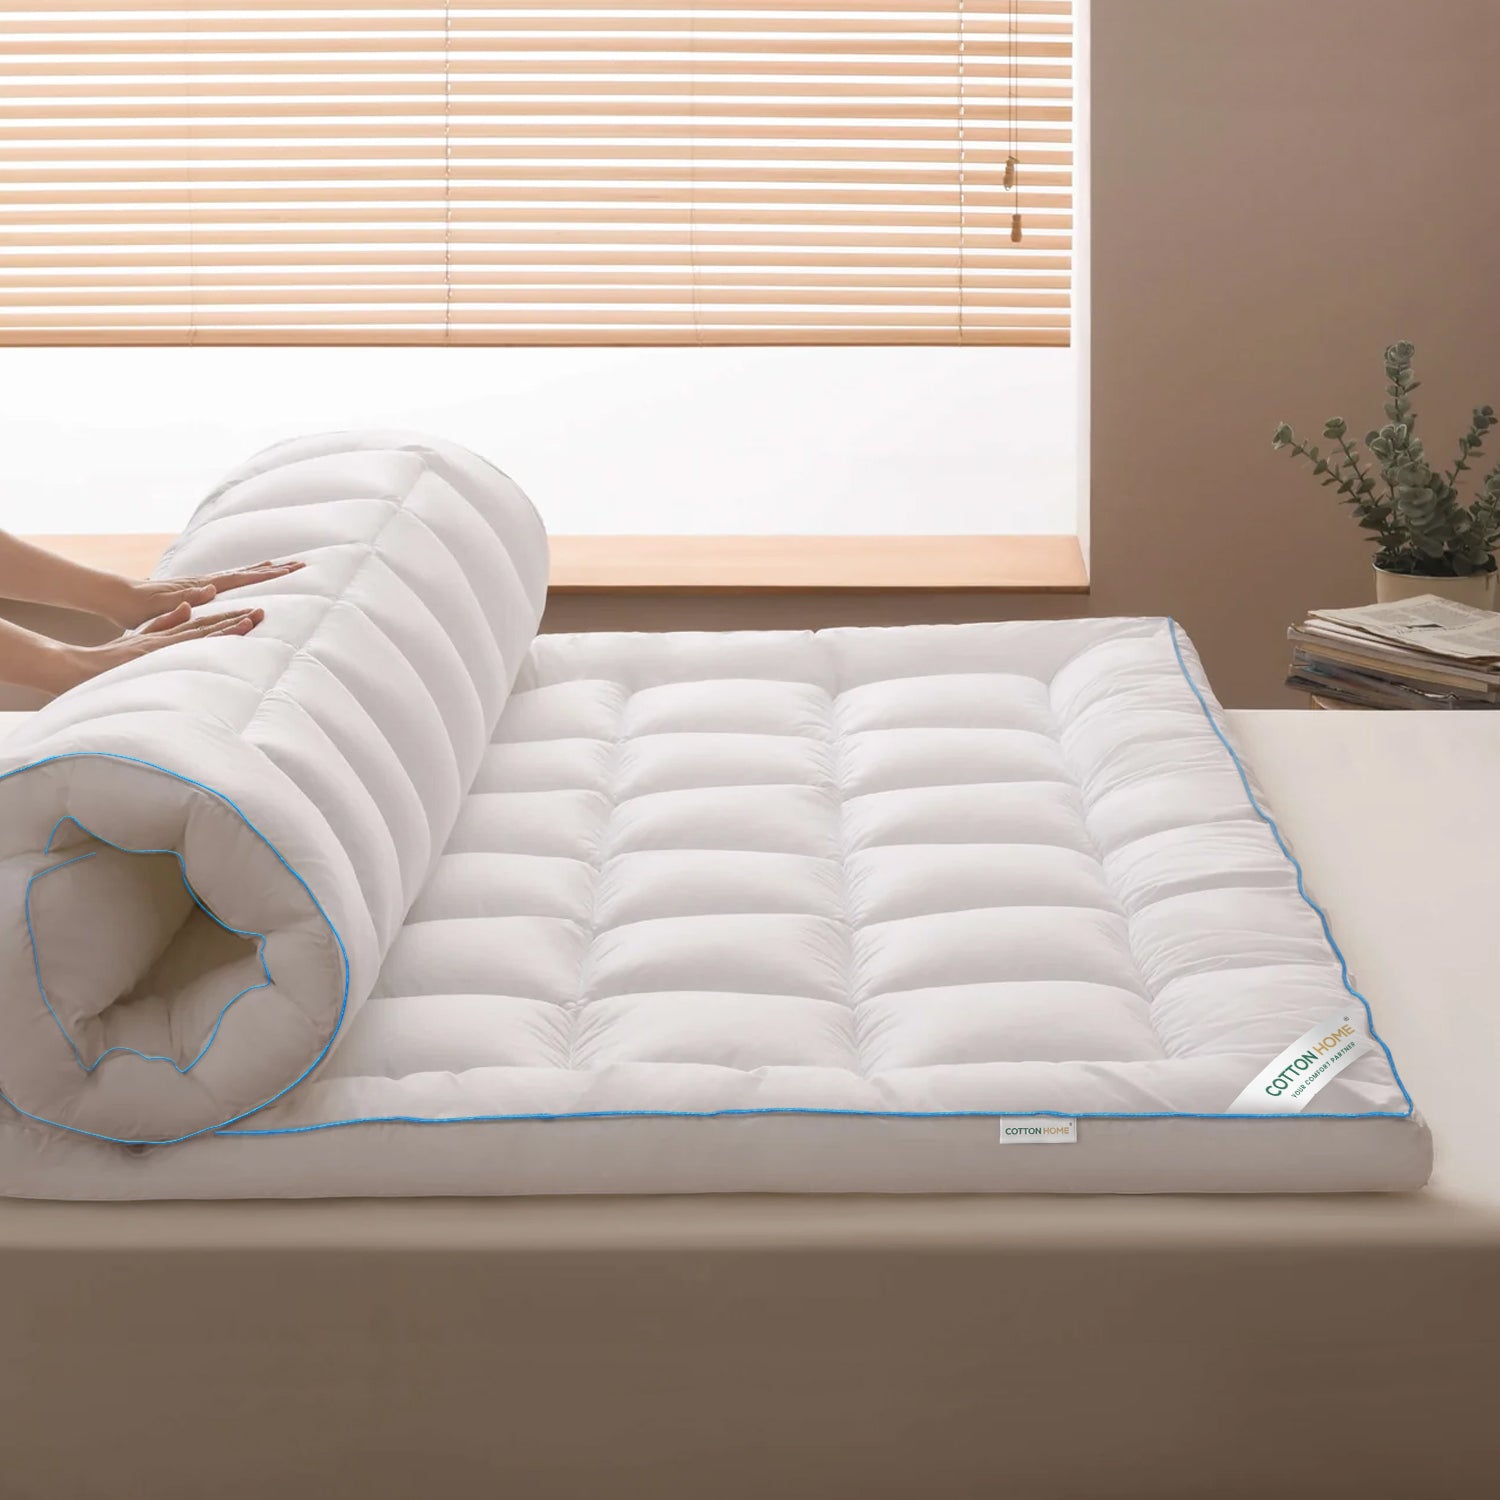 Gel Mattress Topper 8cm Thickness - 200x200cm White with Blue Cord